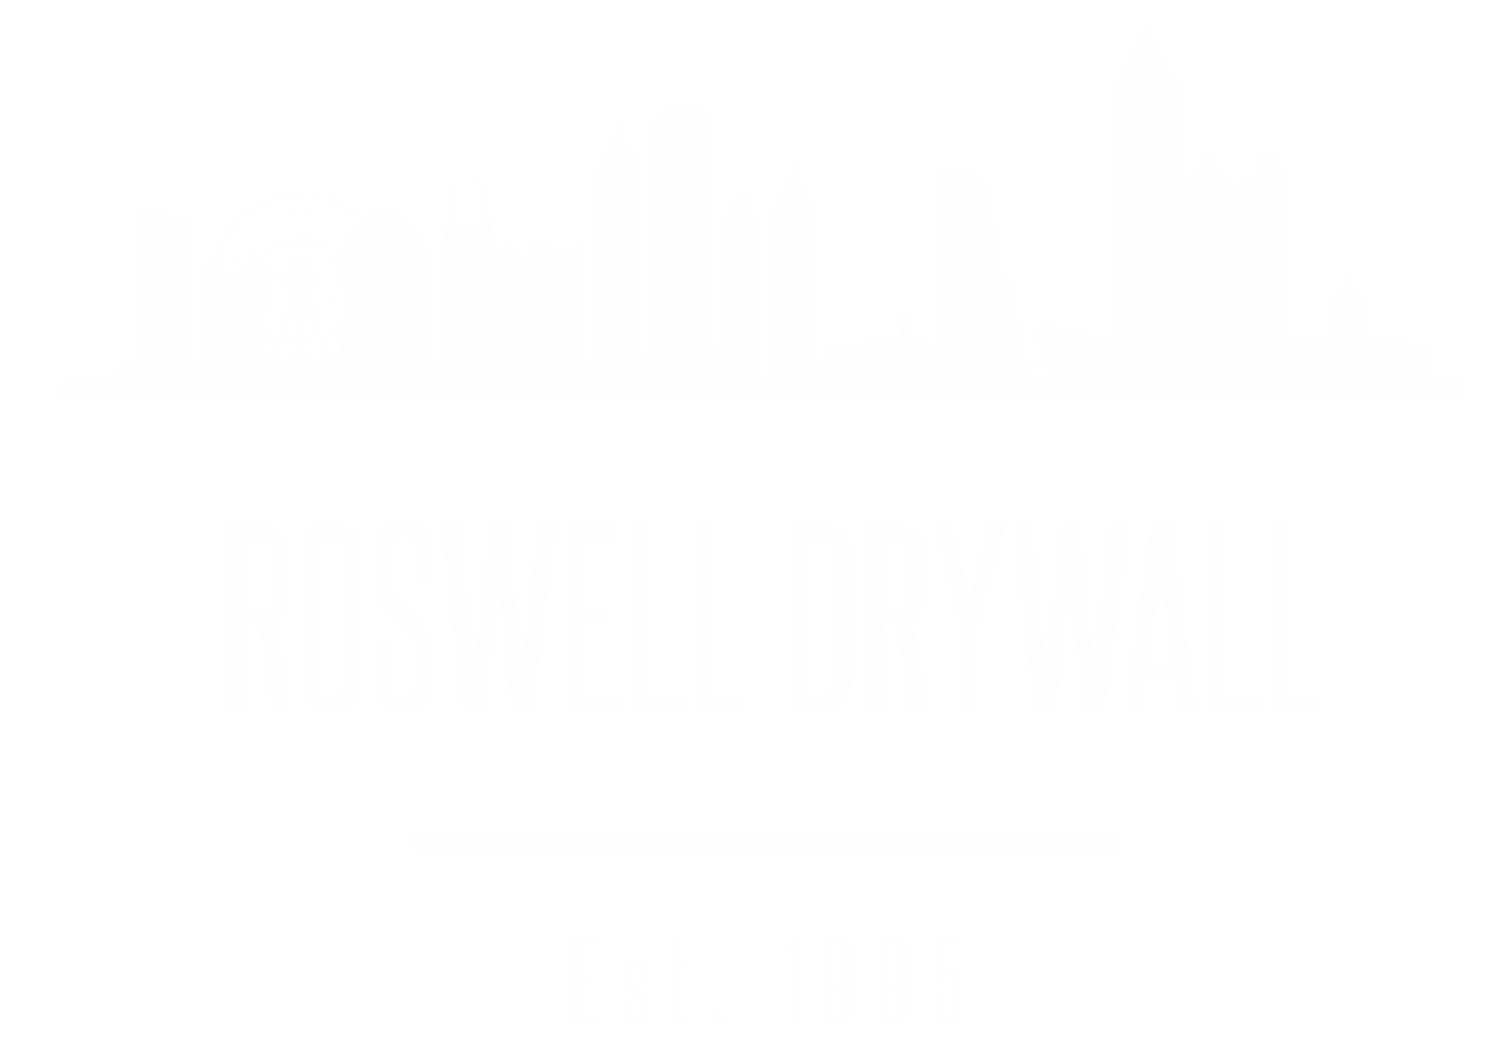 Roswell Drywall